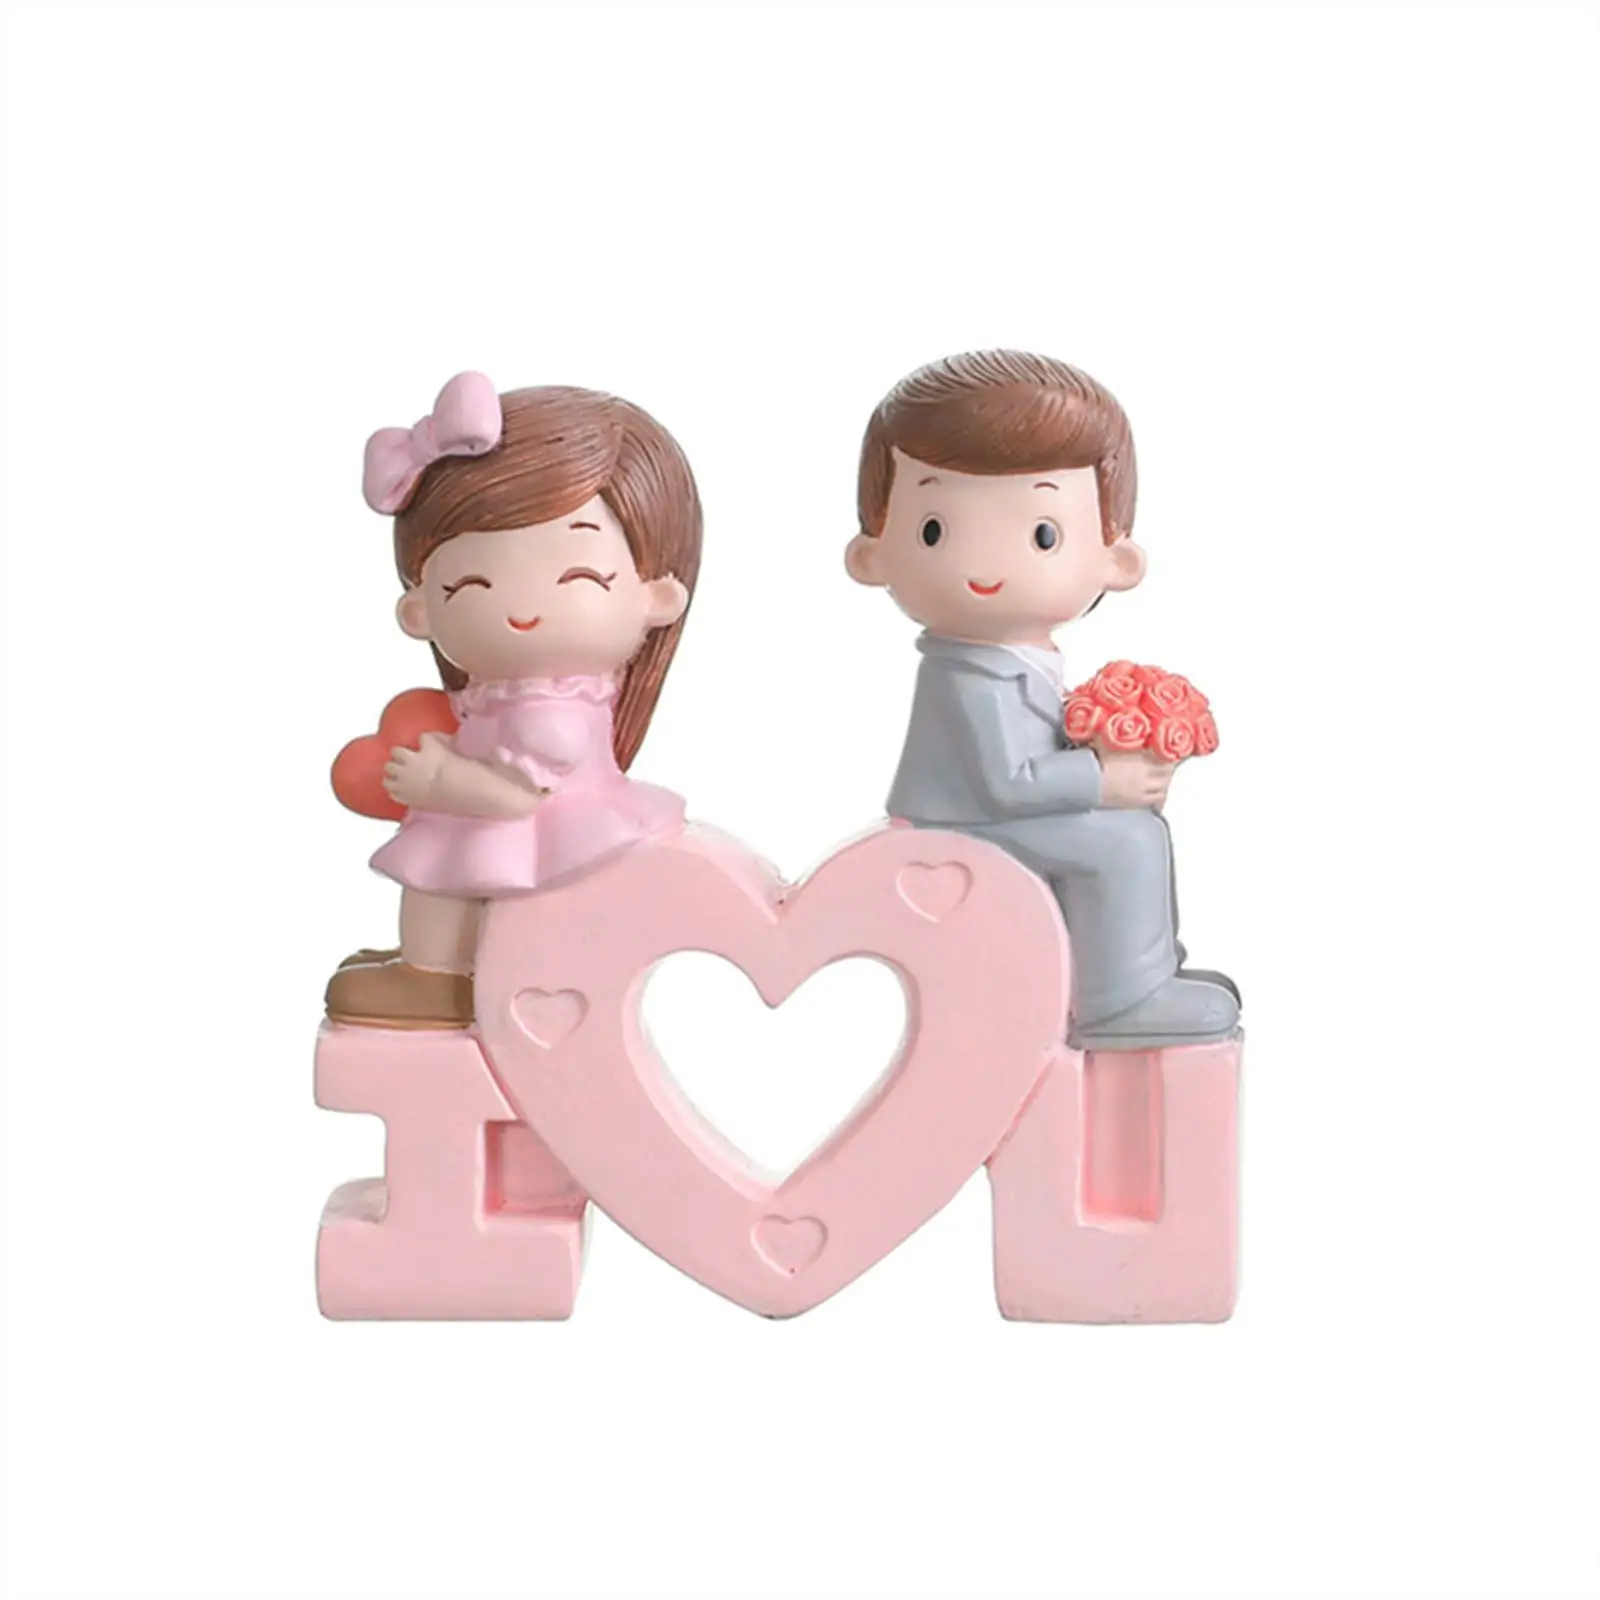 Resin Couple Statue Romantic Ornaments Present Sculpture for Wedding Valentine`S Day Shop Window Themed Party Living Room